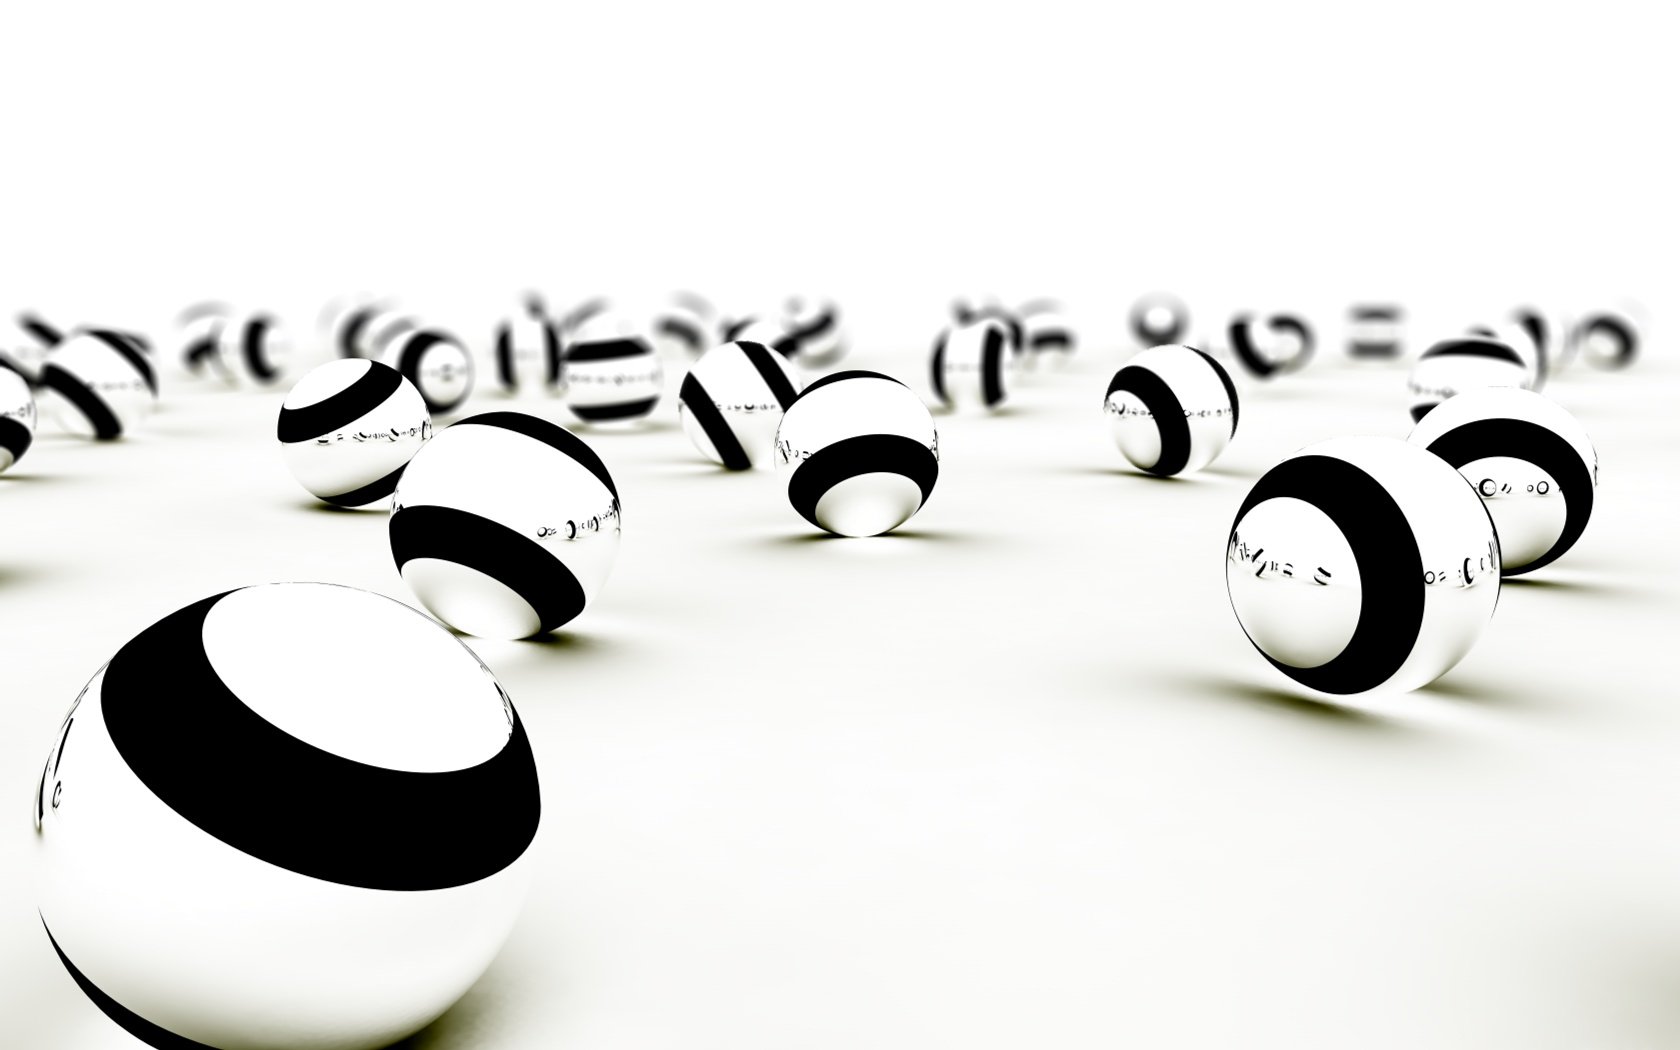 3d, View, Abstract, Circles, Balls, Grayscale, Monochrome, Spheres Wallpaper